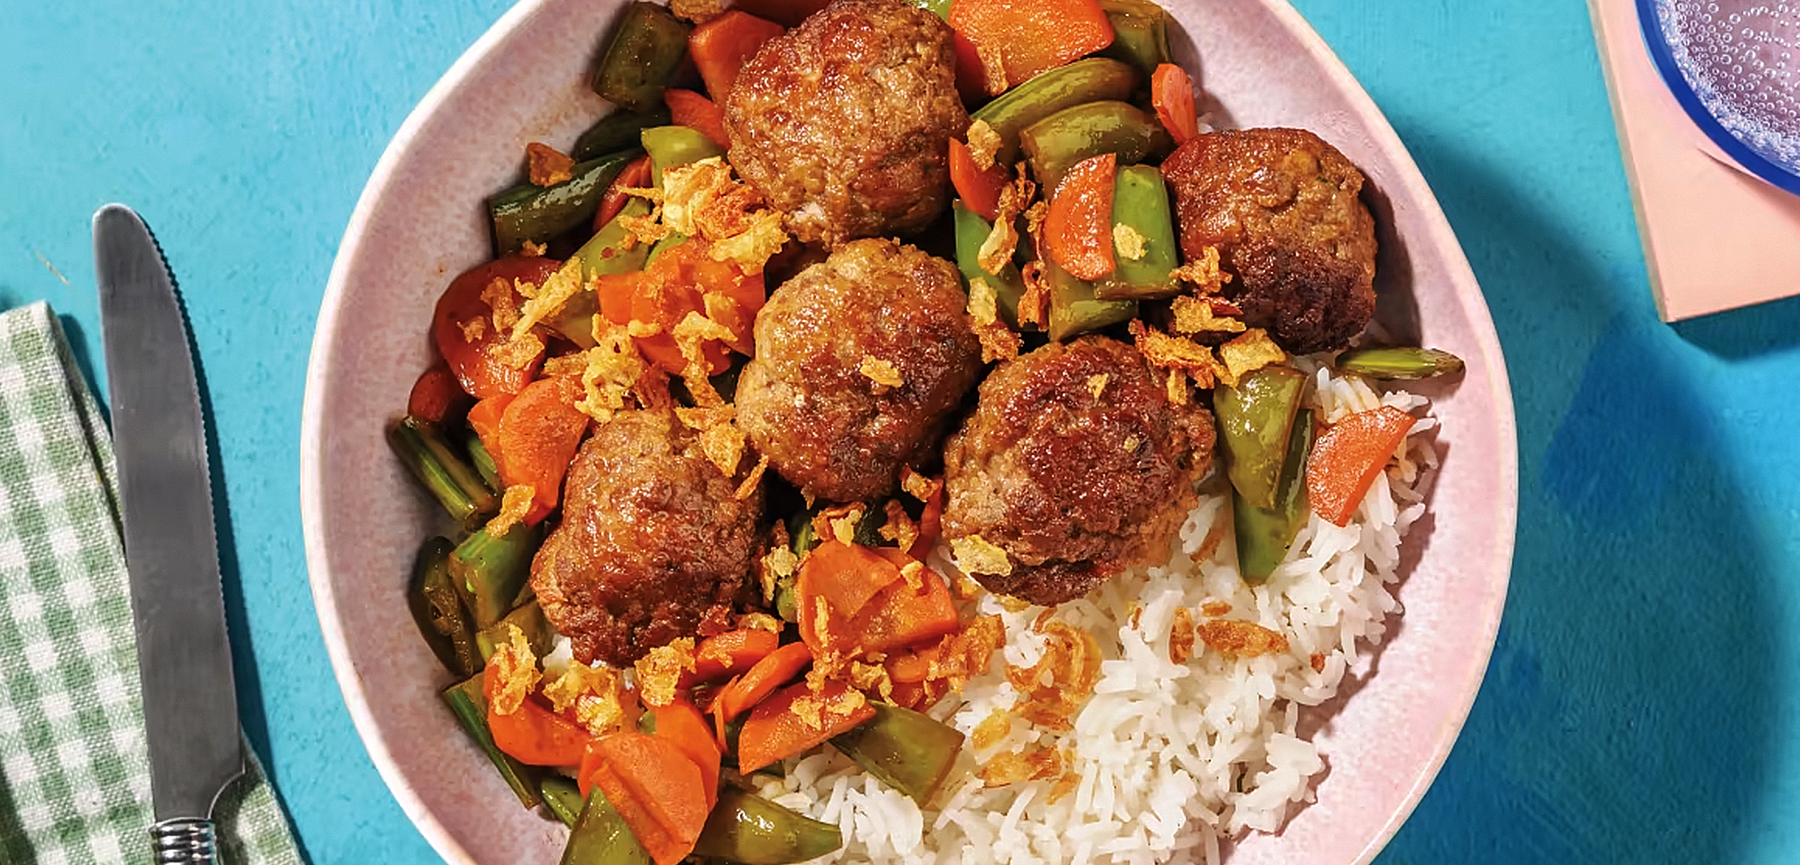 Chicken Meatball and Vegetable Stir-Fry